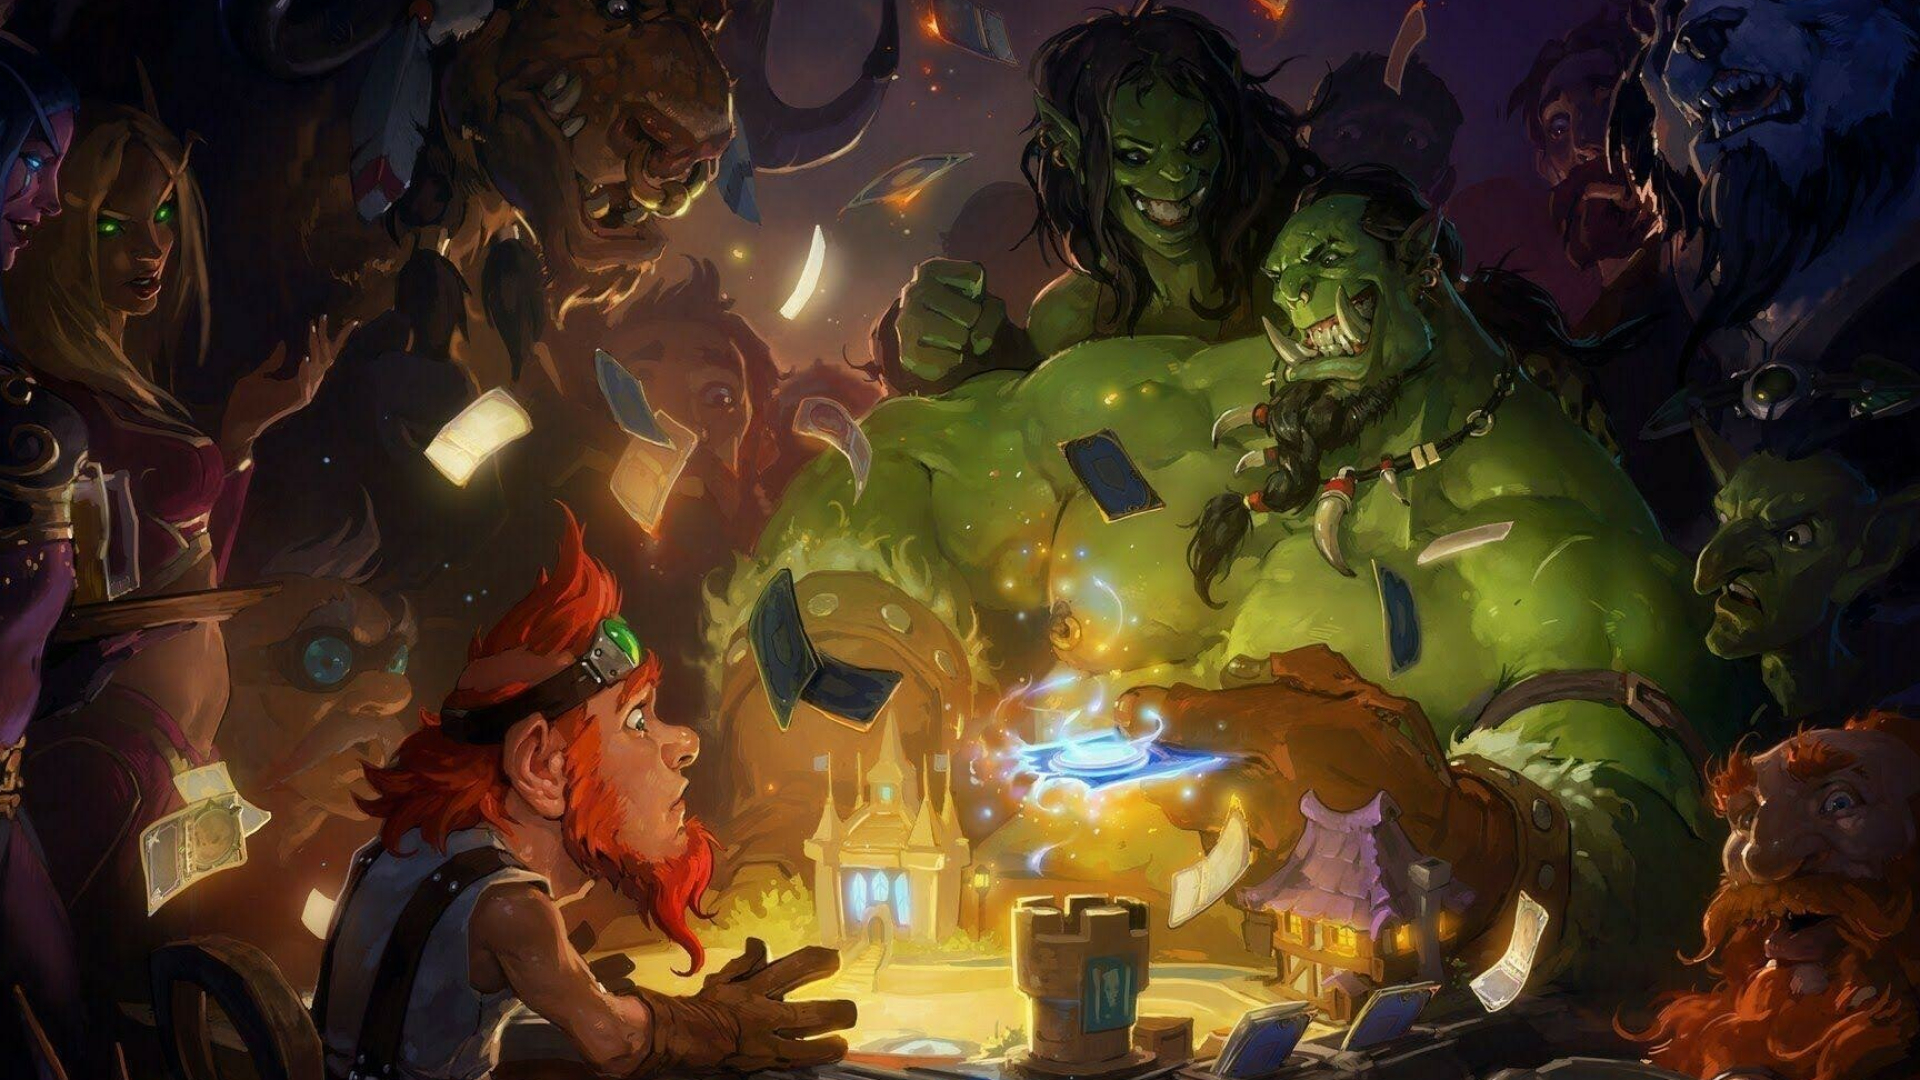 Hearthstone gaming characters, Magical spell casting, Epic battles, Iconic card game, 1920x1080 Full HD Desktop